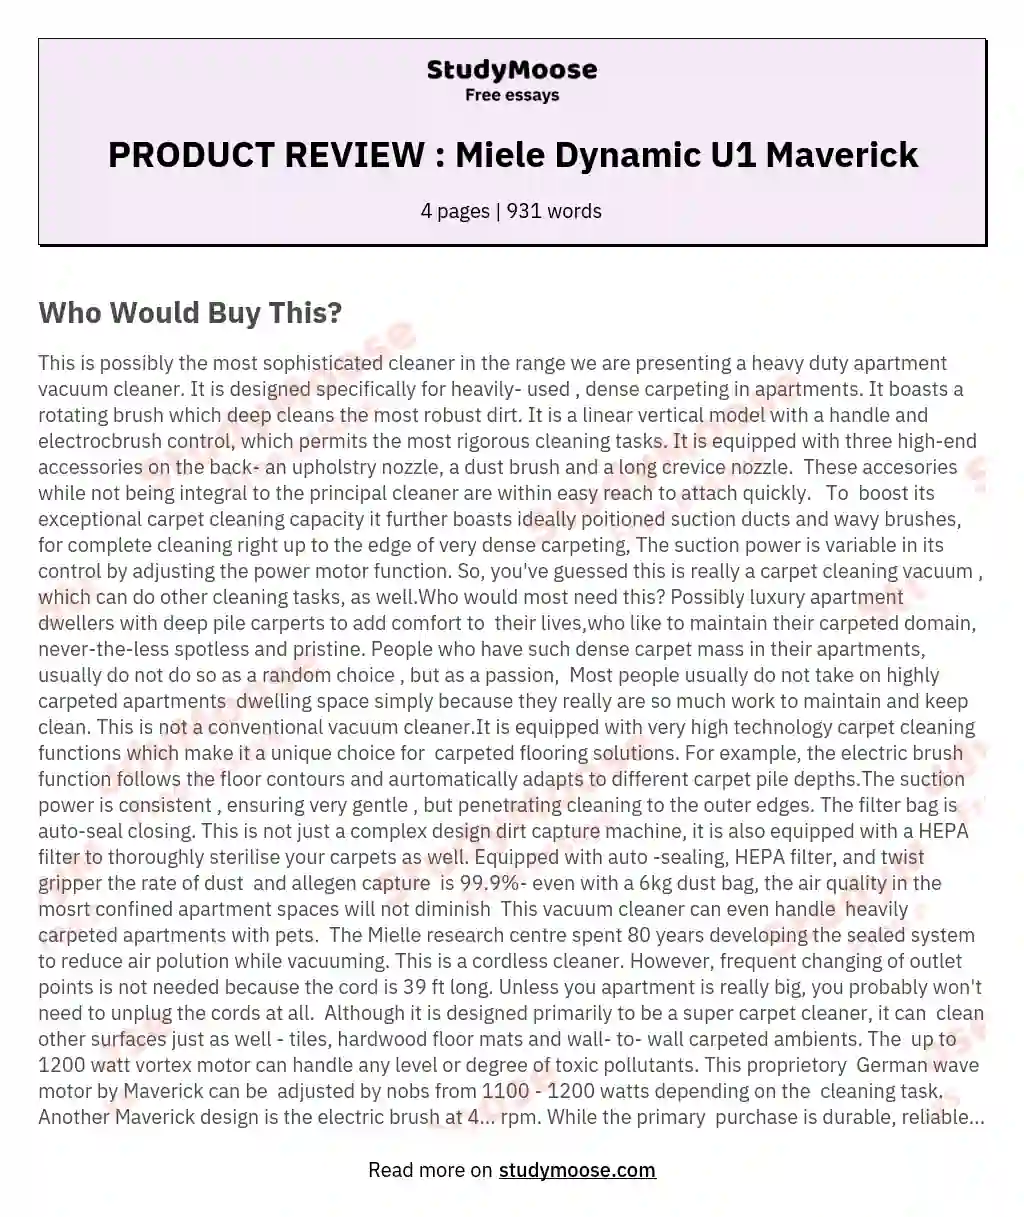 product review essay examples